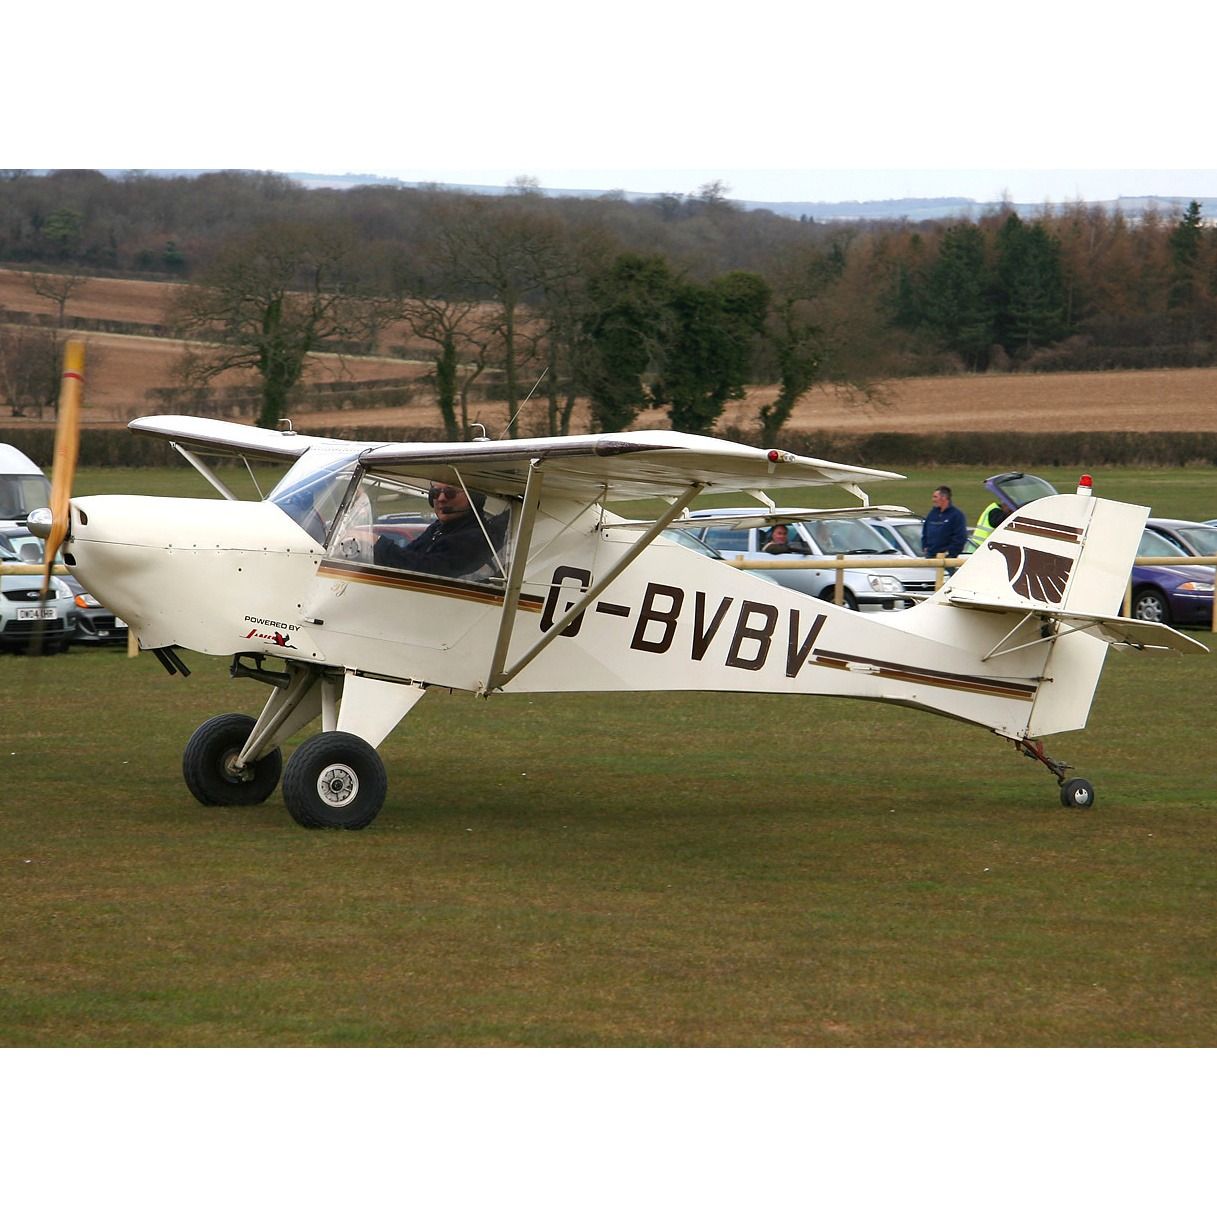 AVID-FLYER-REPLICA-PLANS-FOR-HOMEBUILD-SIMPLE-CHEAP-BUILD-2-SEAT-STOL-AIRCRAFT-7.jpg